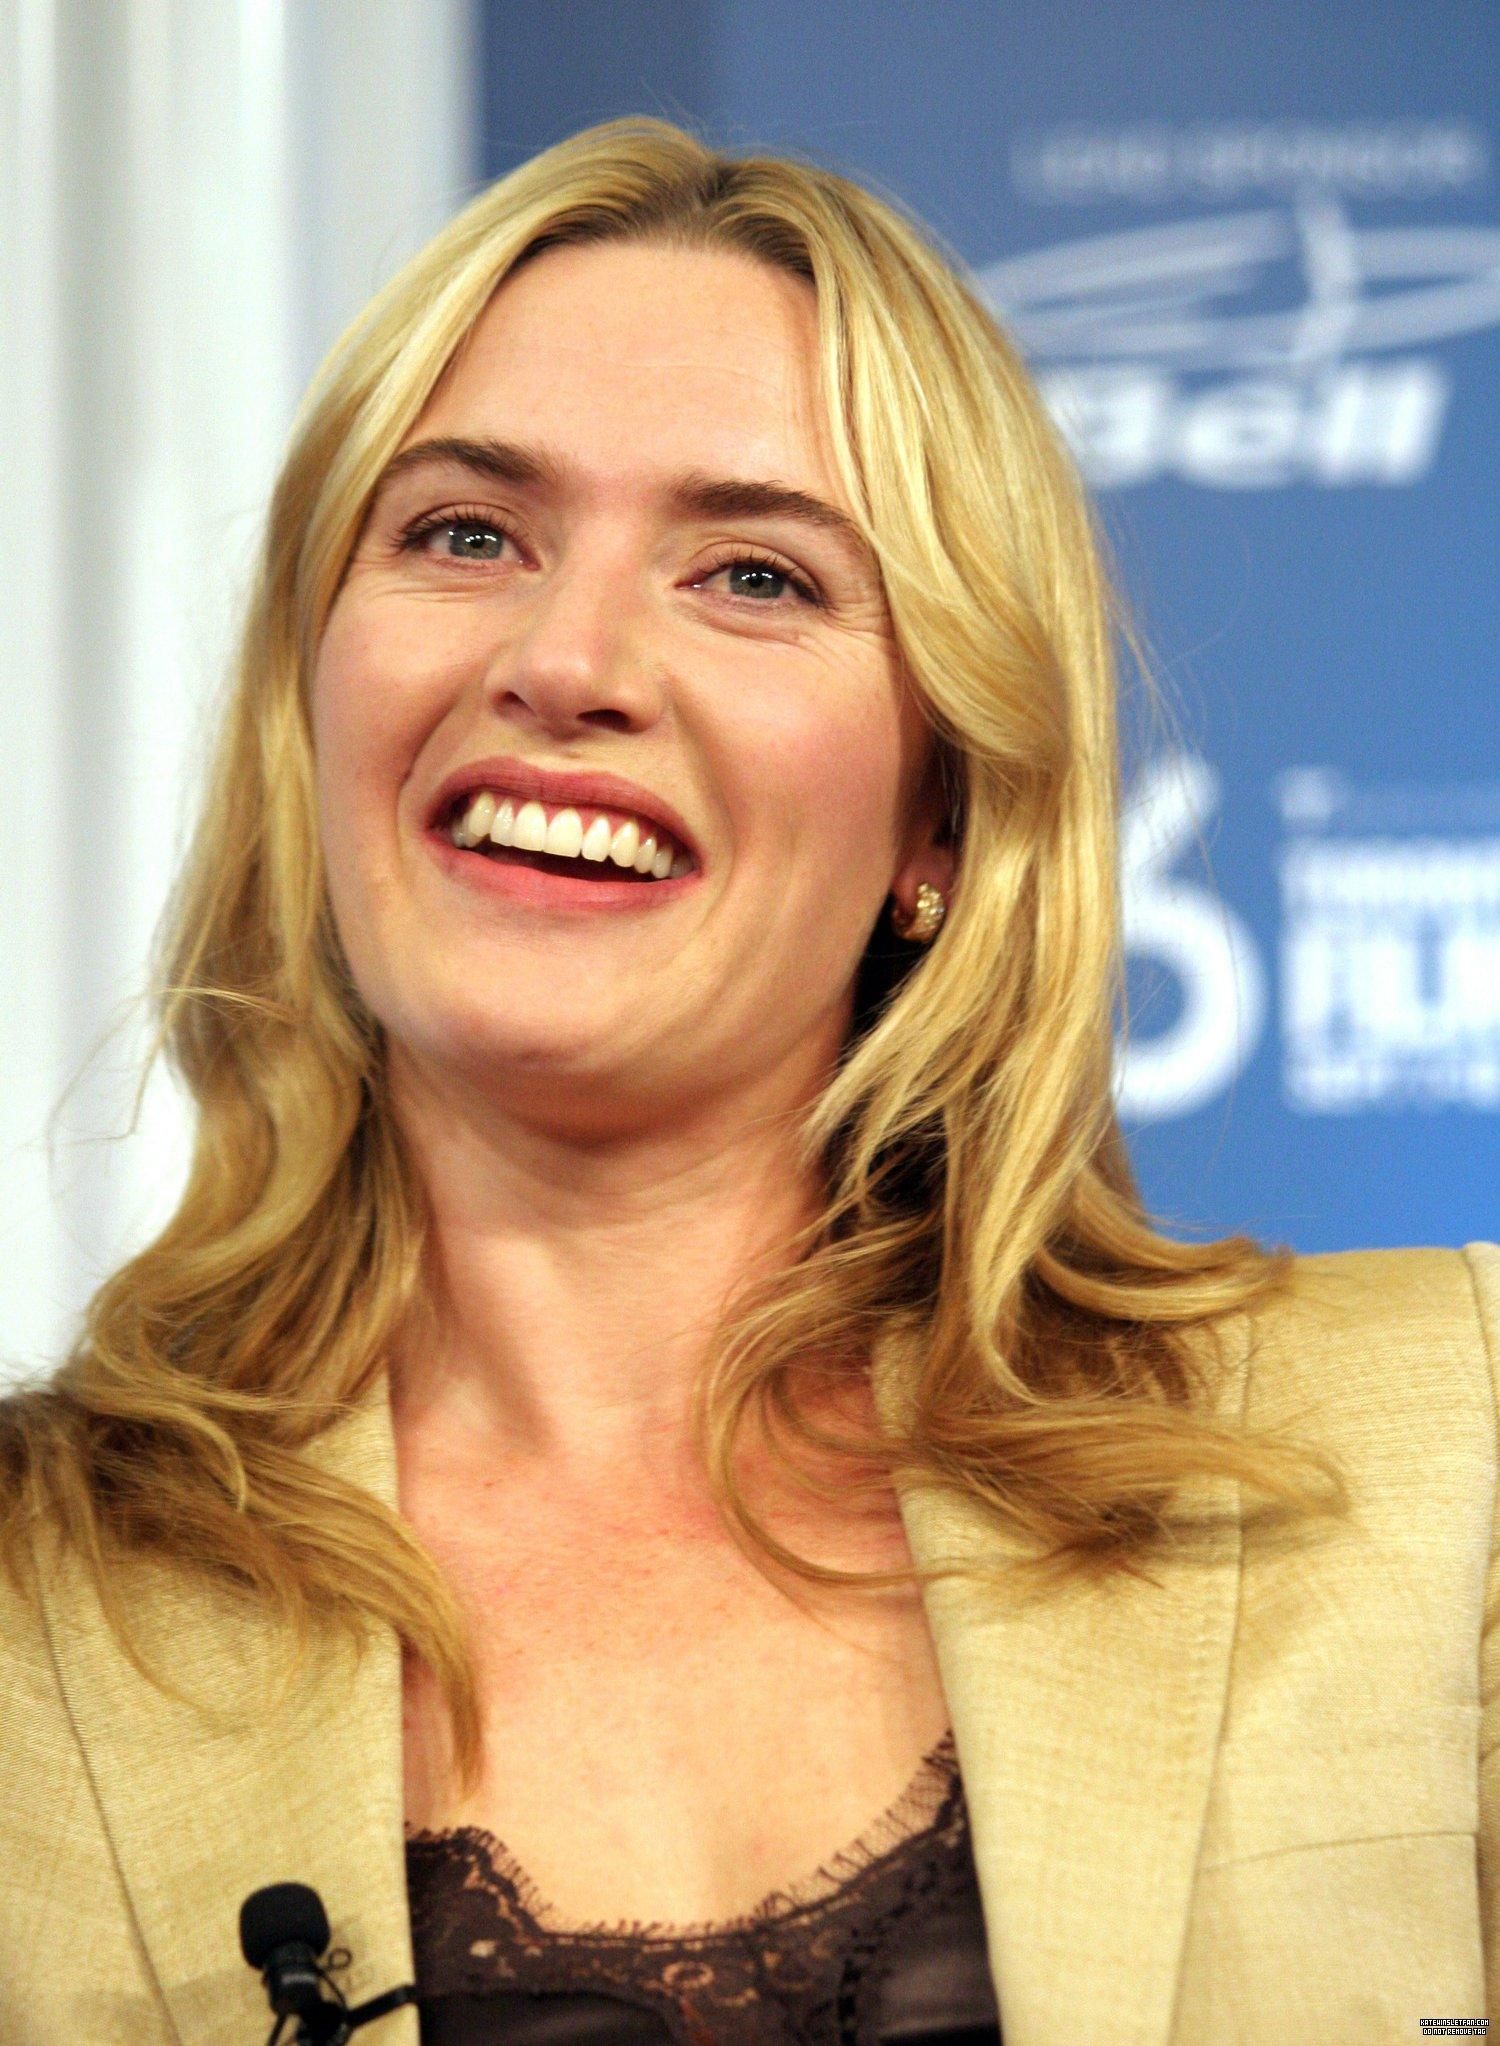 31st-annual-tiff_all-the-kings-men-press-conference_032.jpg